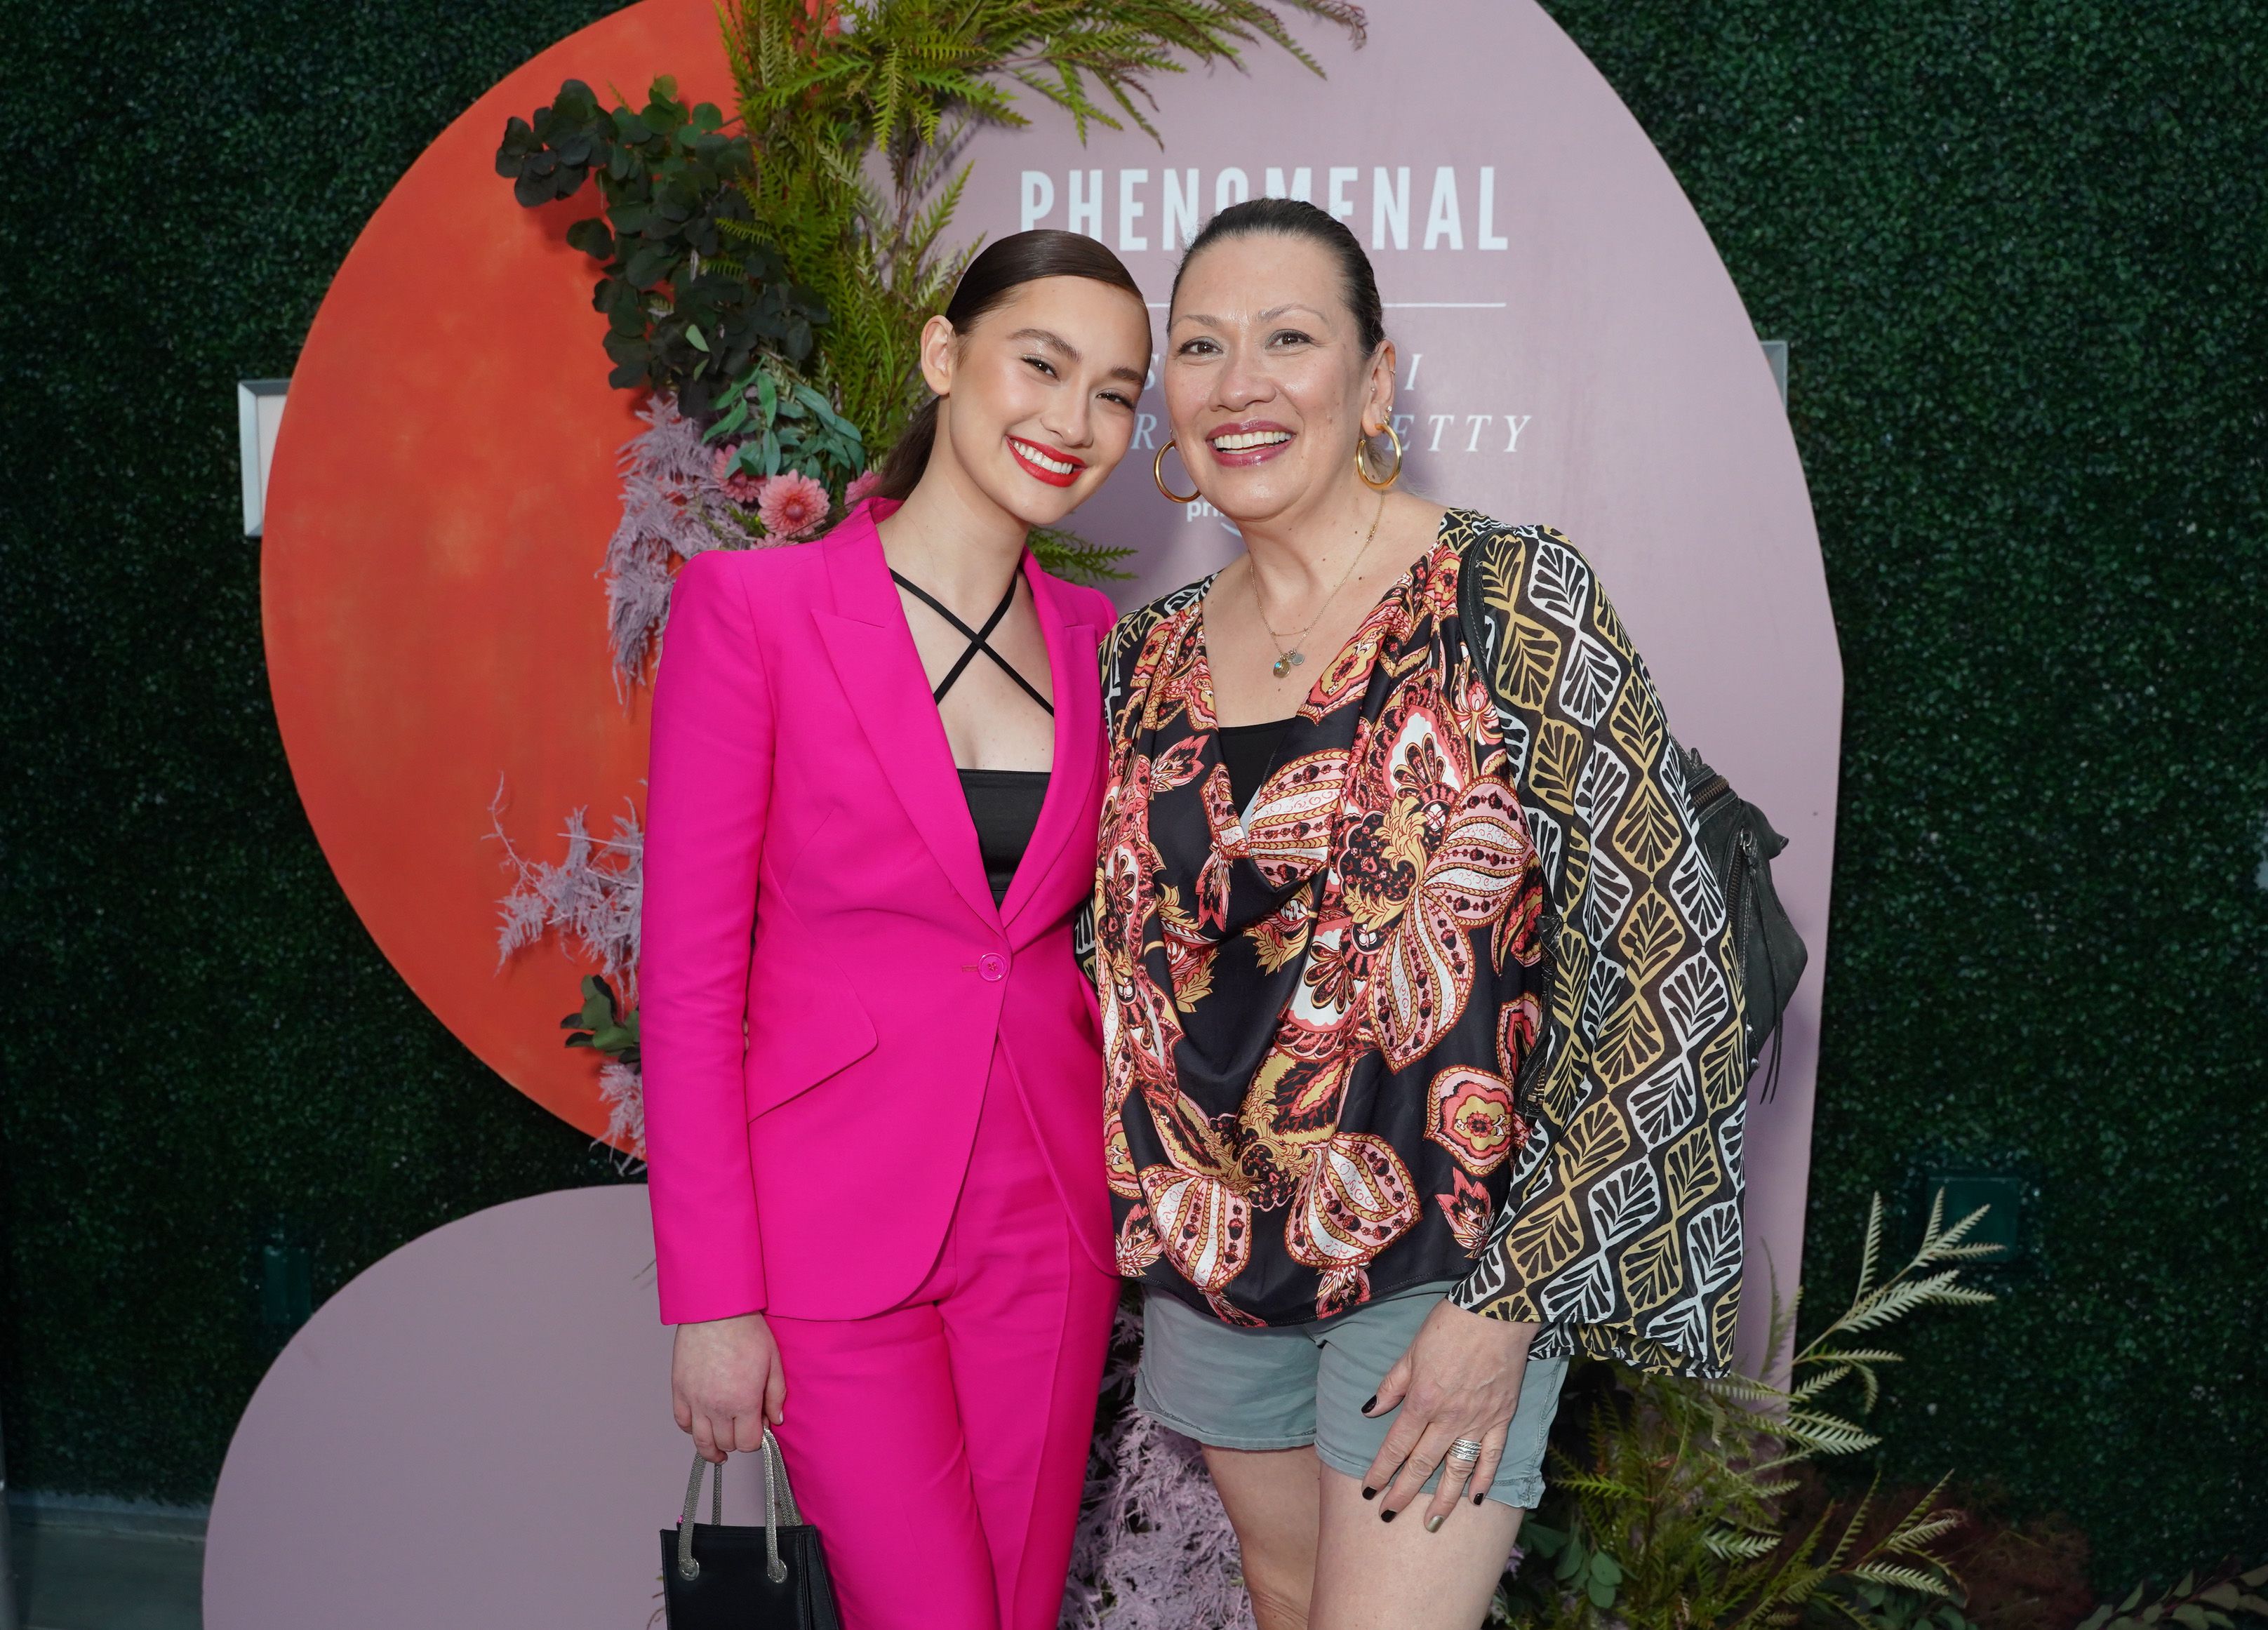 Lola and Pia Tung during the launch of “The Summer I Turned Pretty” on June 16, 2022, in New York, NY. | Source: Getty Images